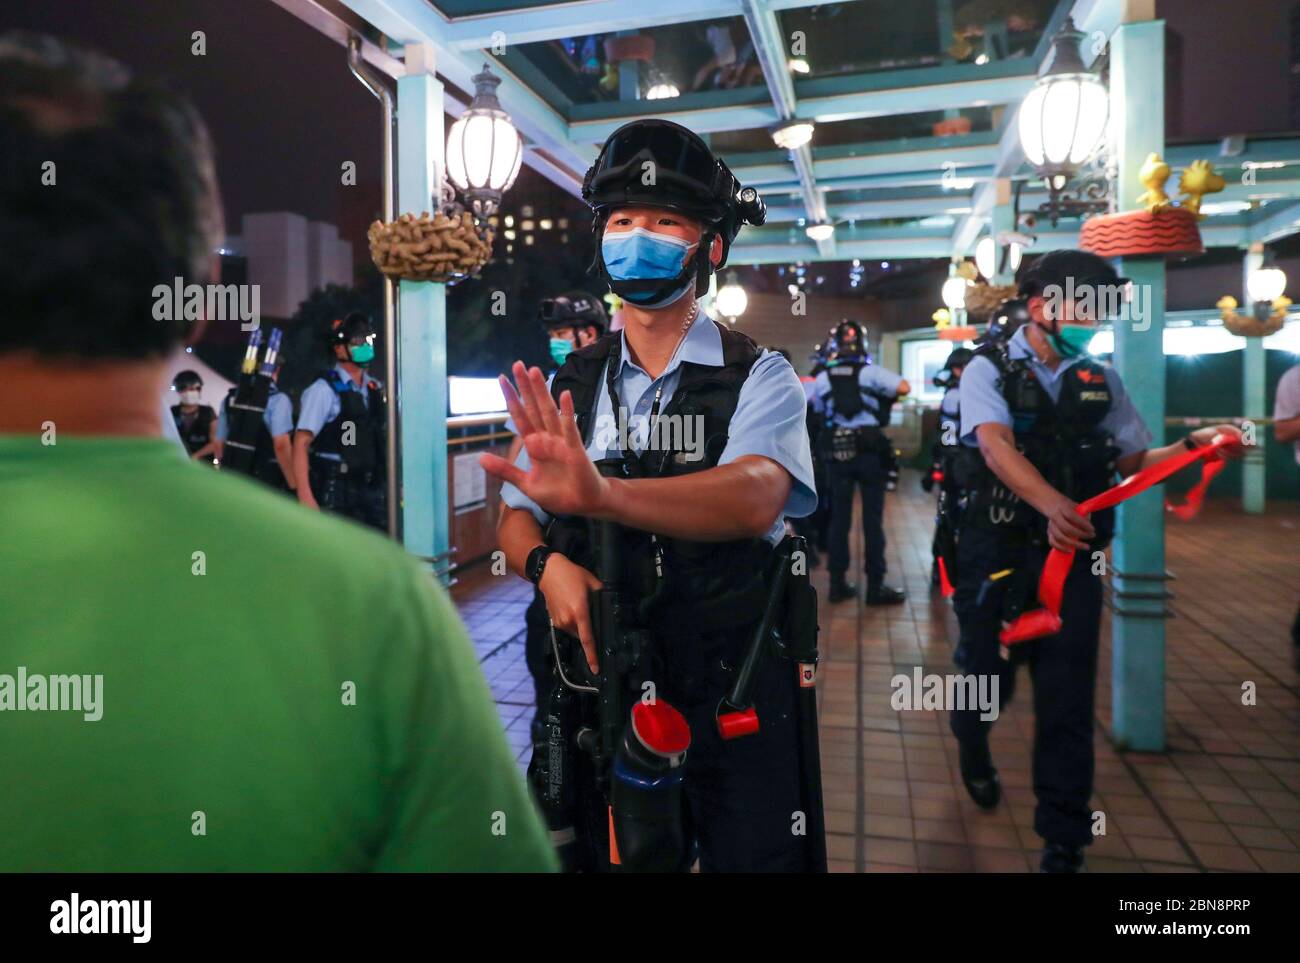 Police officers seen confronting with protesters during the protest.Pro-democracy protesters gather in different shopping malls on 13 May 2020, the day of Hong Kong chief executive Carrie Lam birthday. They demand investigation for the brutality actions carried out to the protesters by the Hong Kong police during last year's protests triggered by the extradition bill. Stock Photo